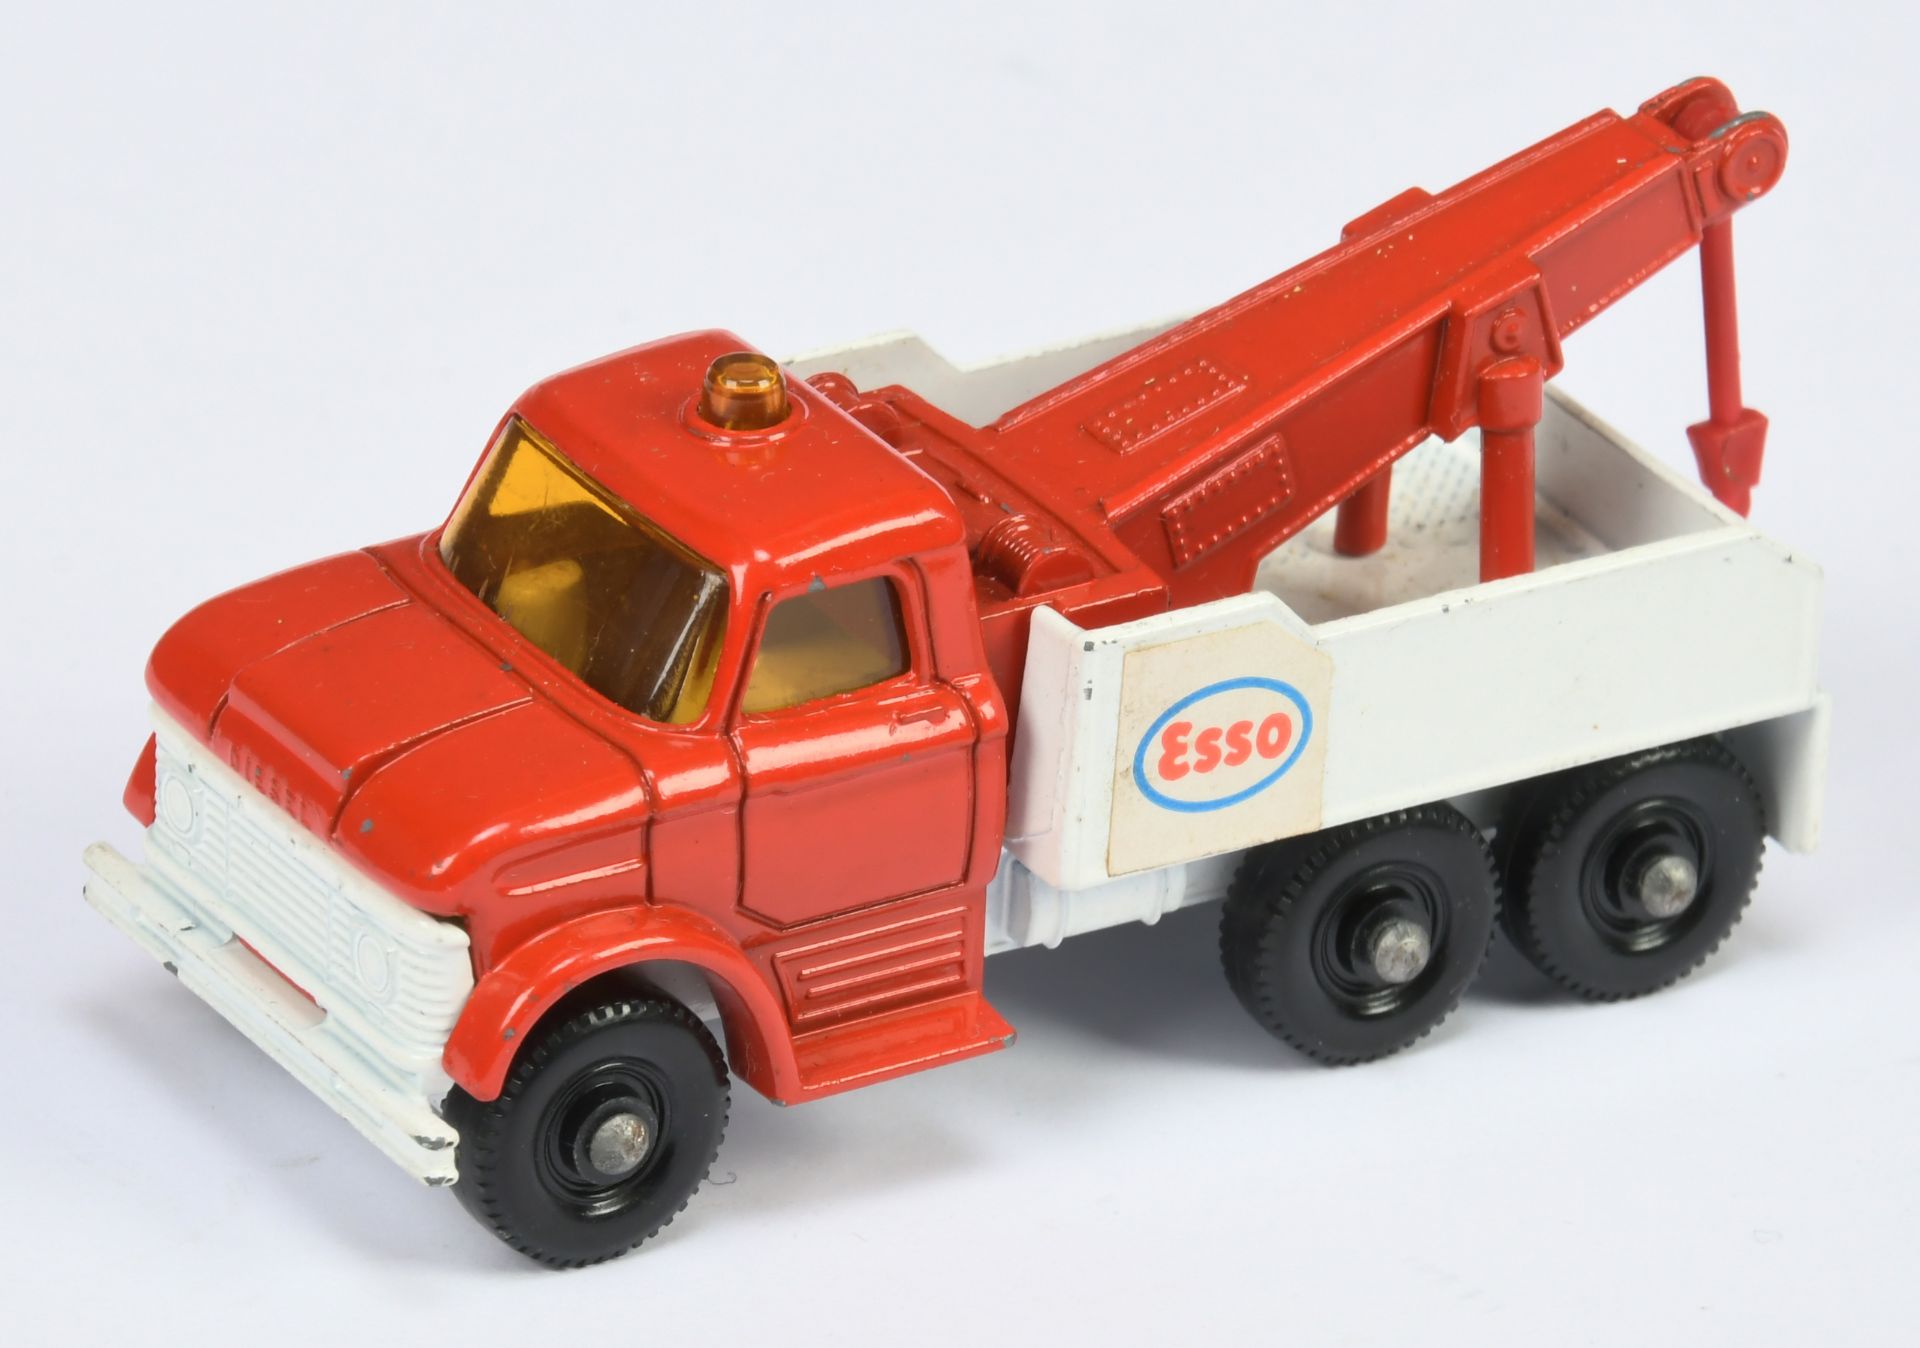 Matchbox Regular Wheels 71c Ford Heavy Wreck Truck "Esso" - red cab, jib and plastic hook, white ...